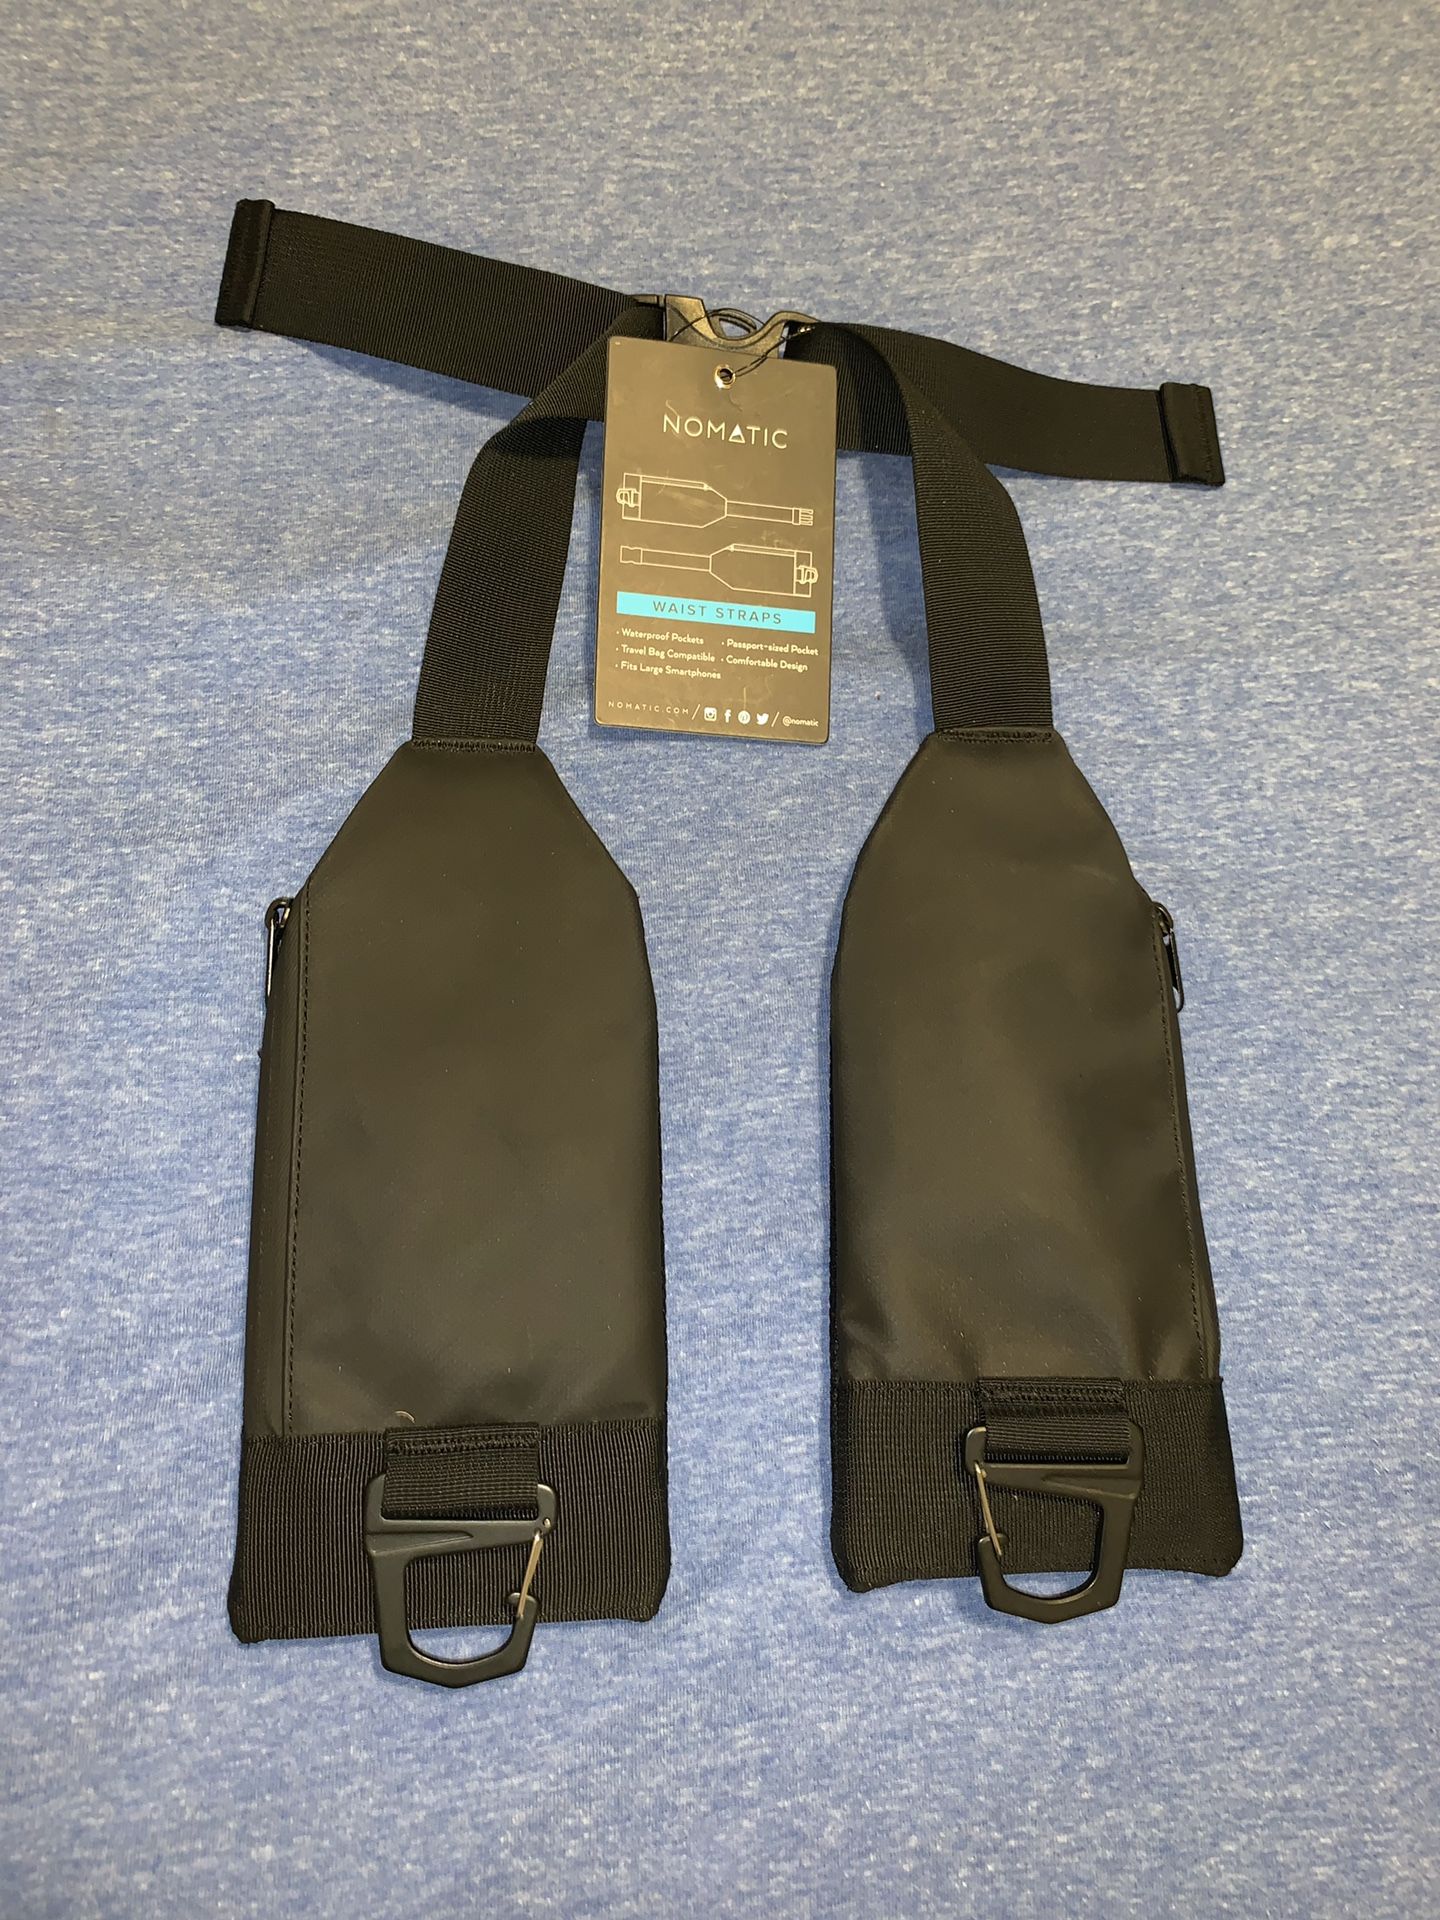 NOMATIC WAIST STRAPS - BRAND NEW NEVER USED